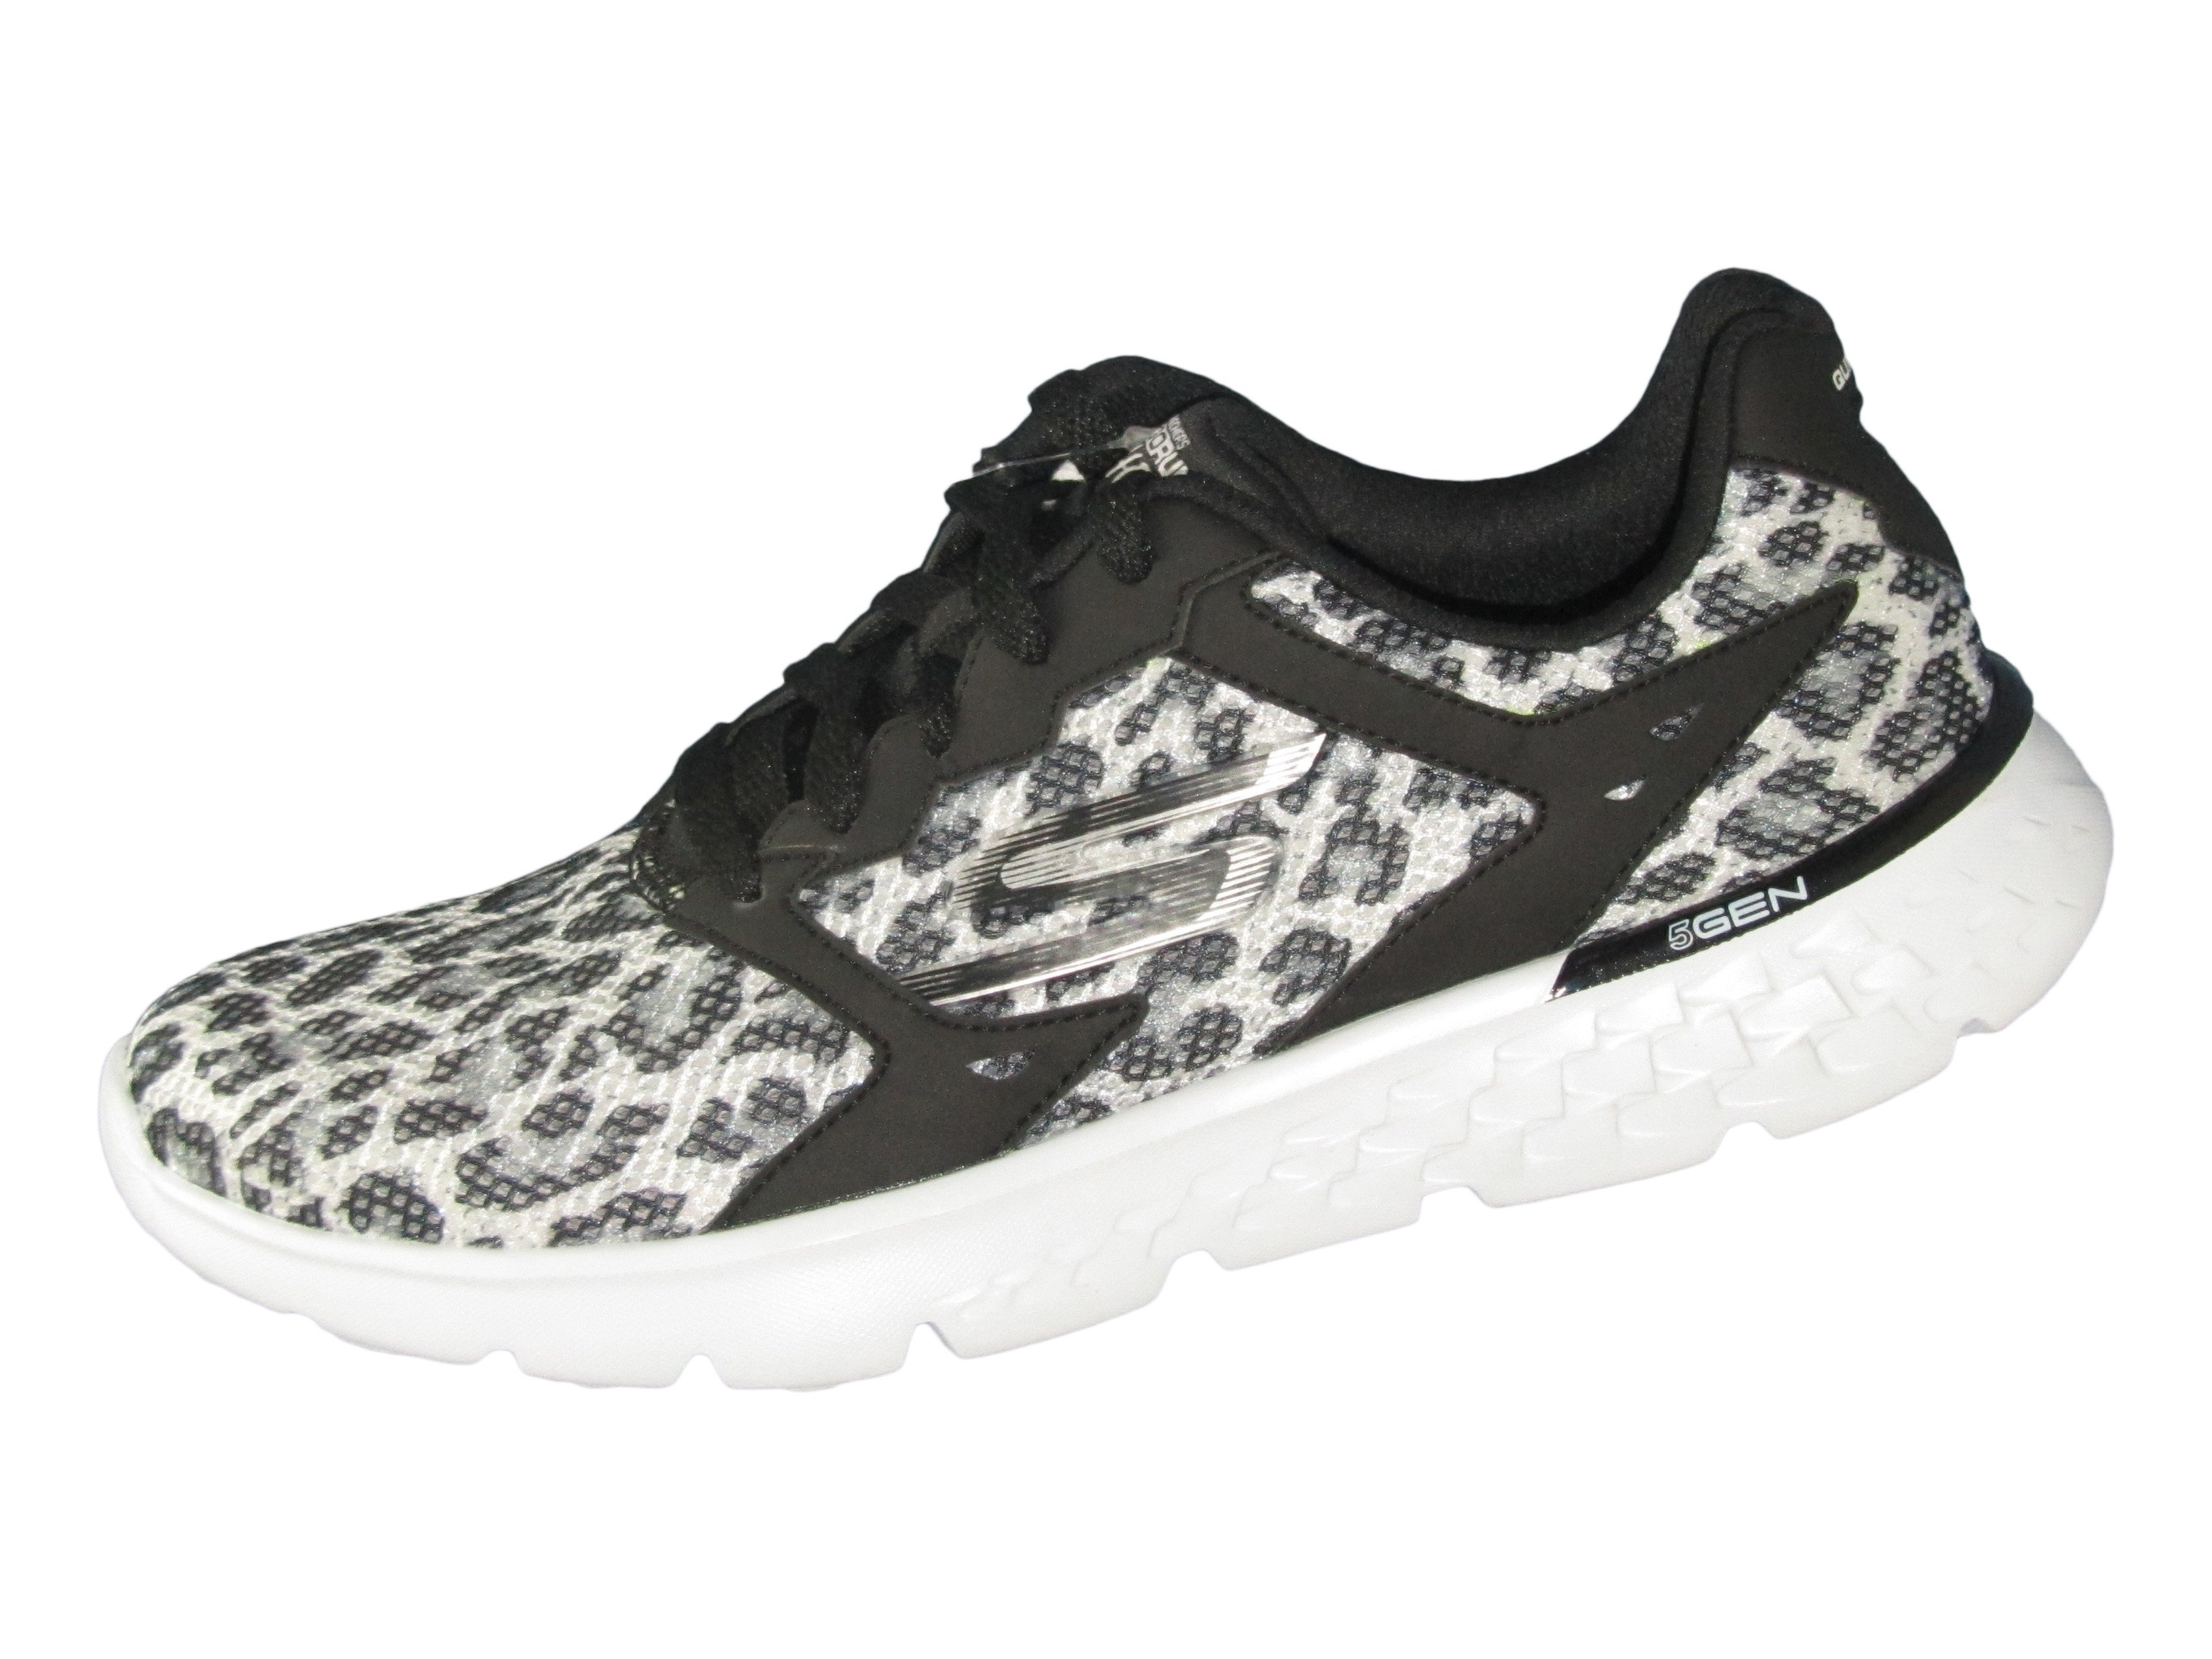 14354 RUN 400 LEOPARD SKECHERS - WOMENS SHOES-SCUFFS & SLIDES : Shirley's Shoes - AW17 SKECHERS